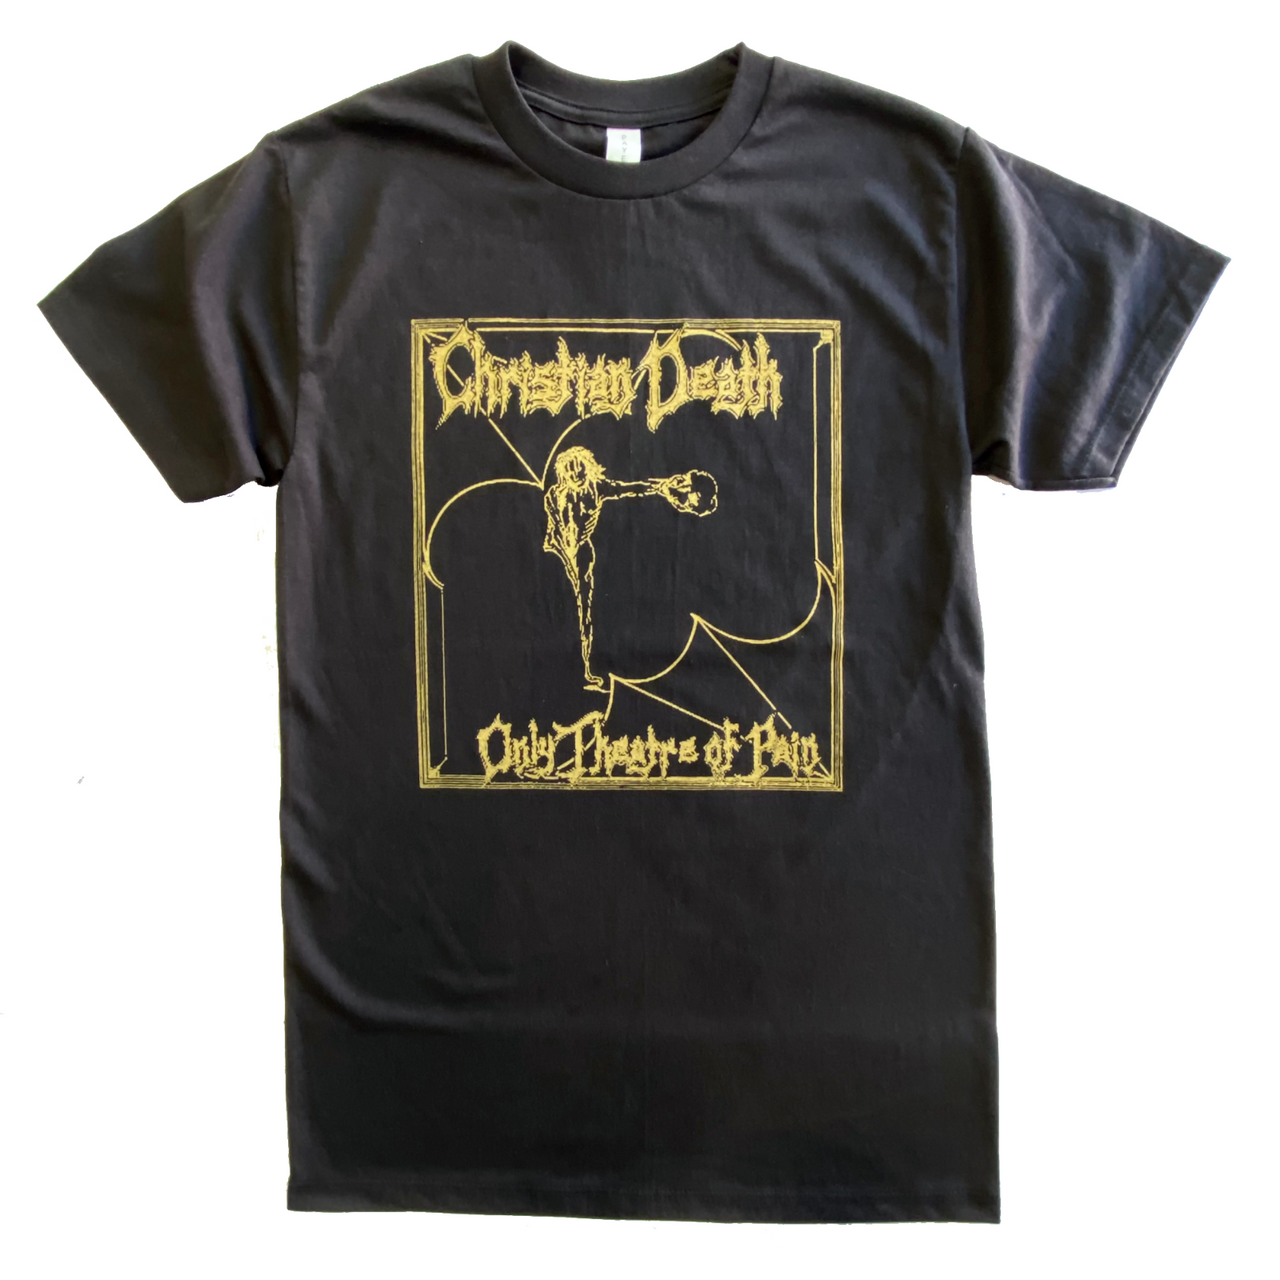 Christian Death Only Theatre of Pain Gold T-Shirt